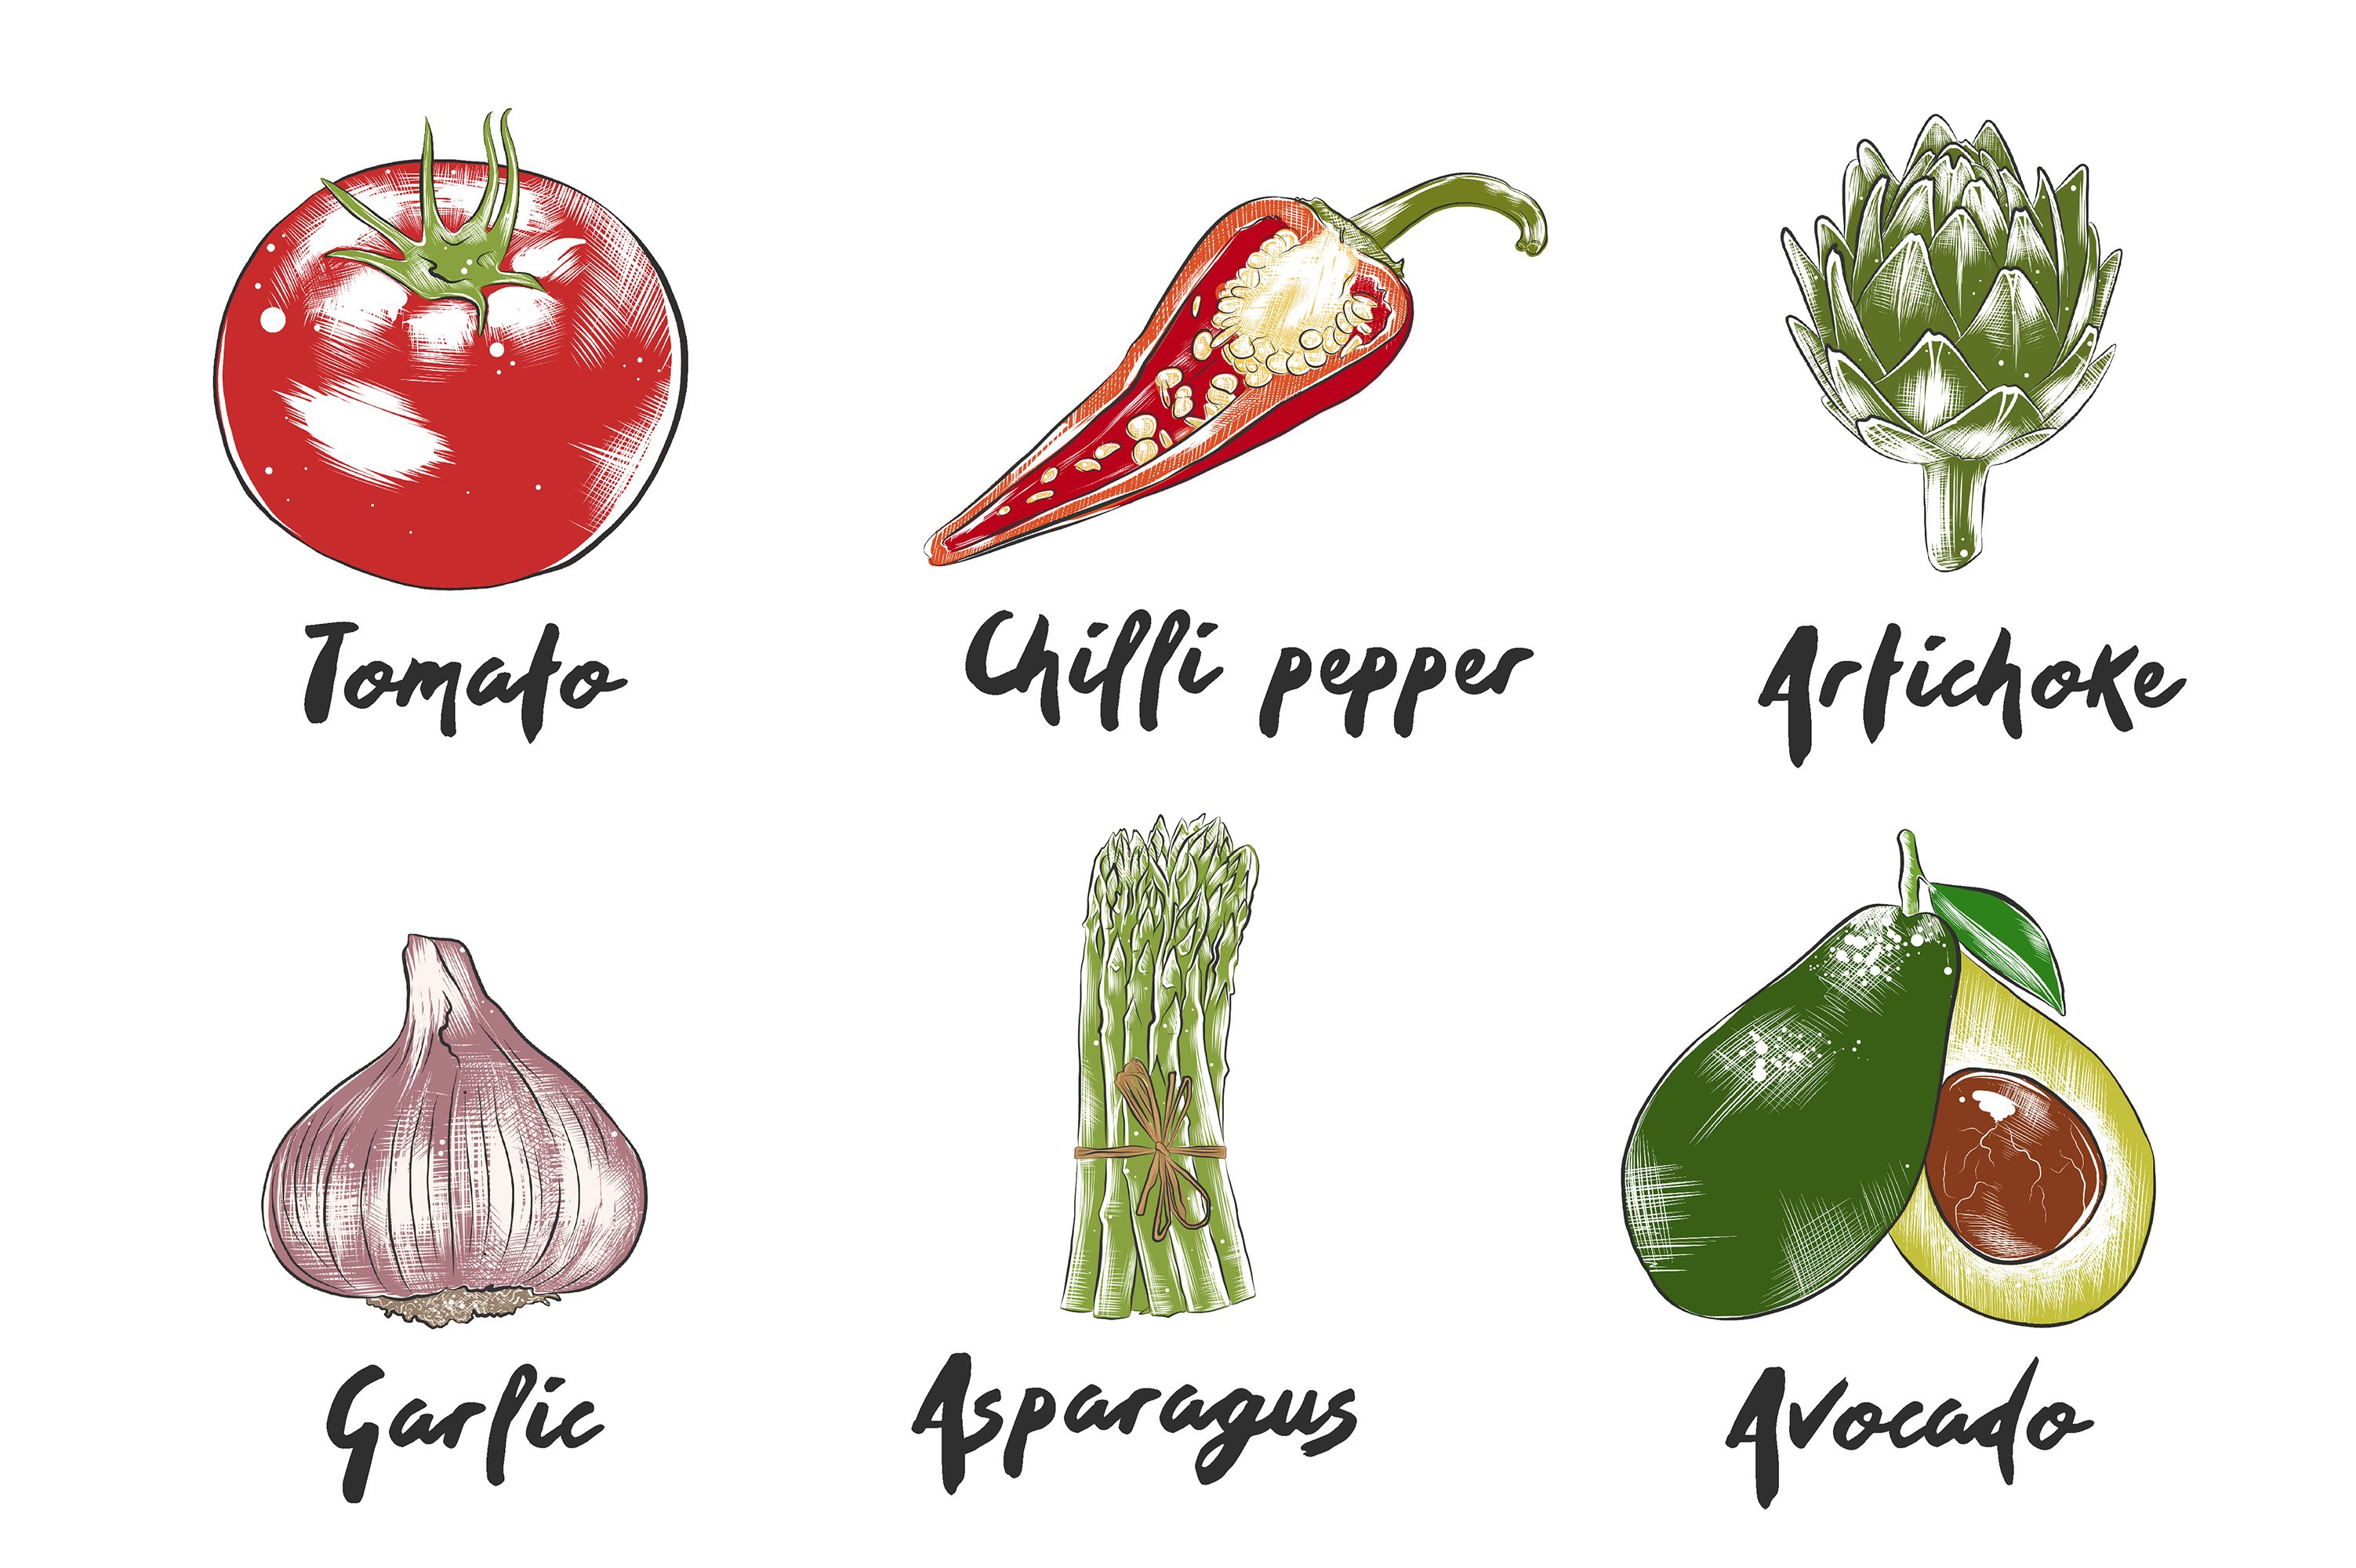 A picture of different types of vegetables.